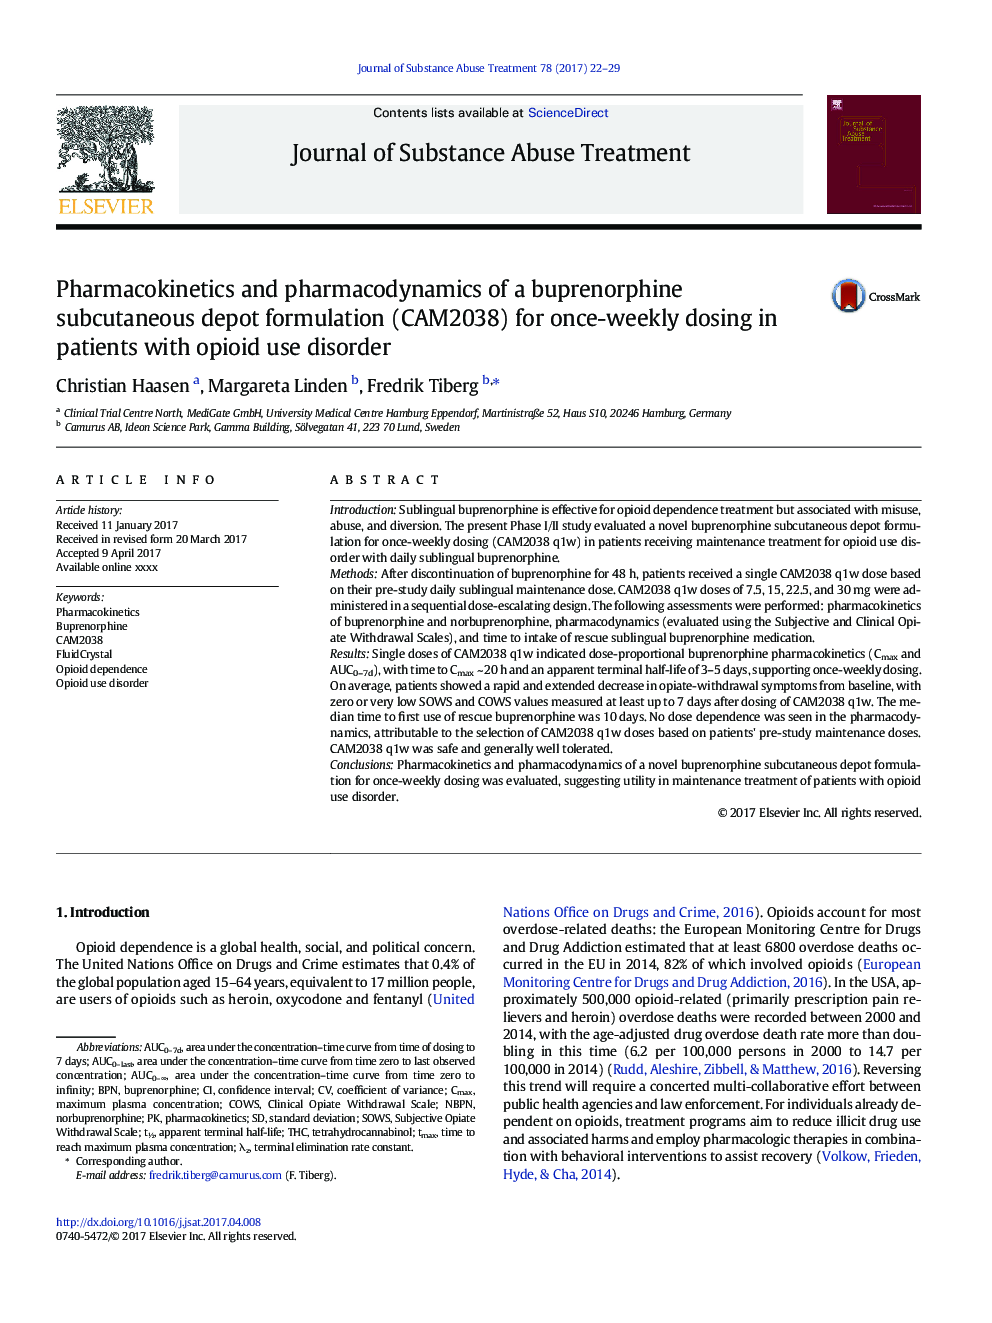 Pharmacokinetics and pharmacodynamics of a buprenorphine subcutaneous depot formulation (CAM2038) for once-weekly dosing in patients with opioid use disorder